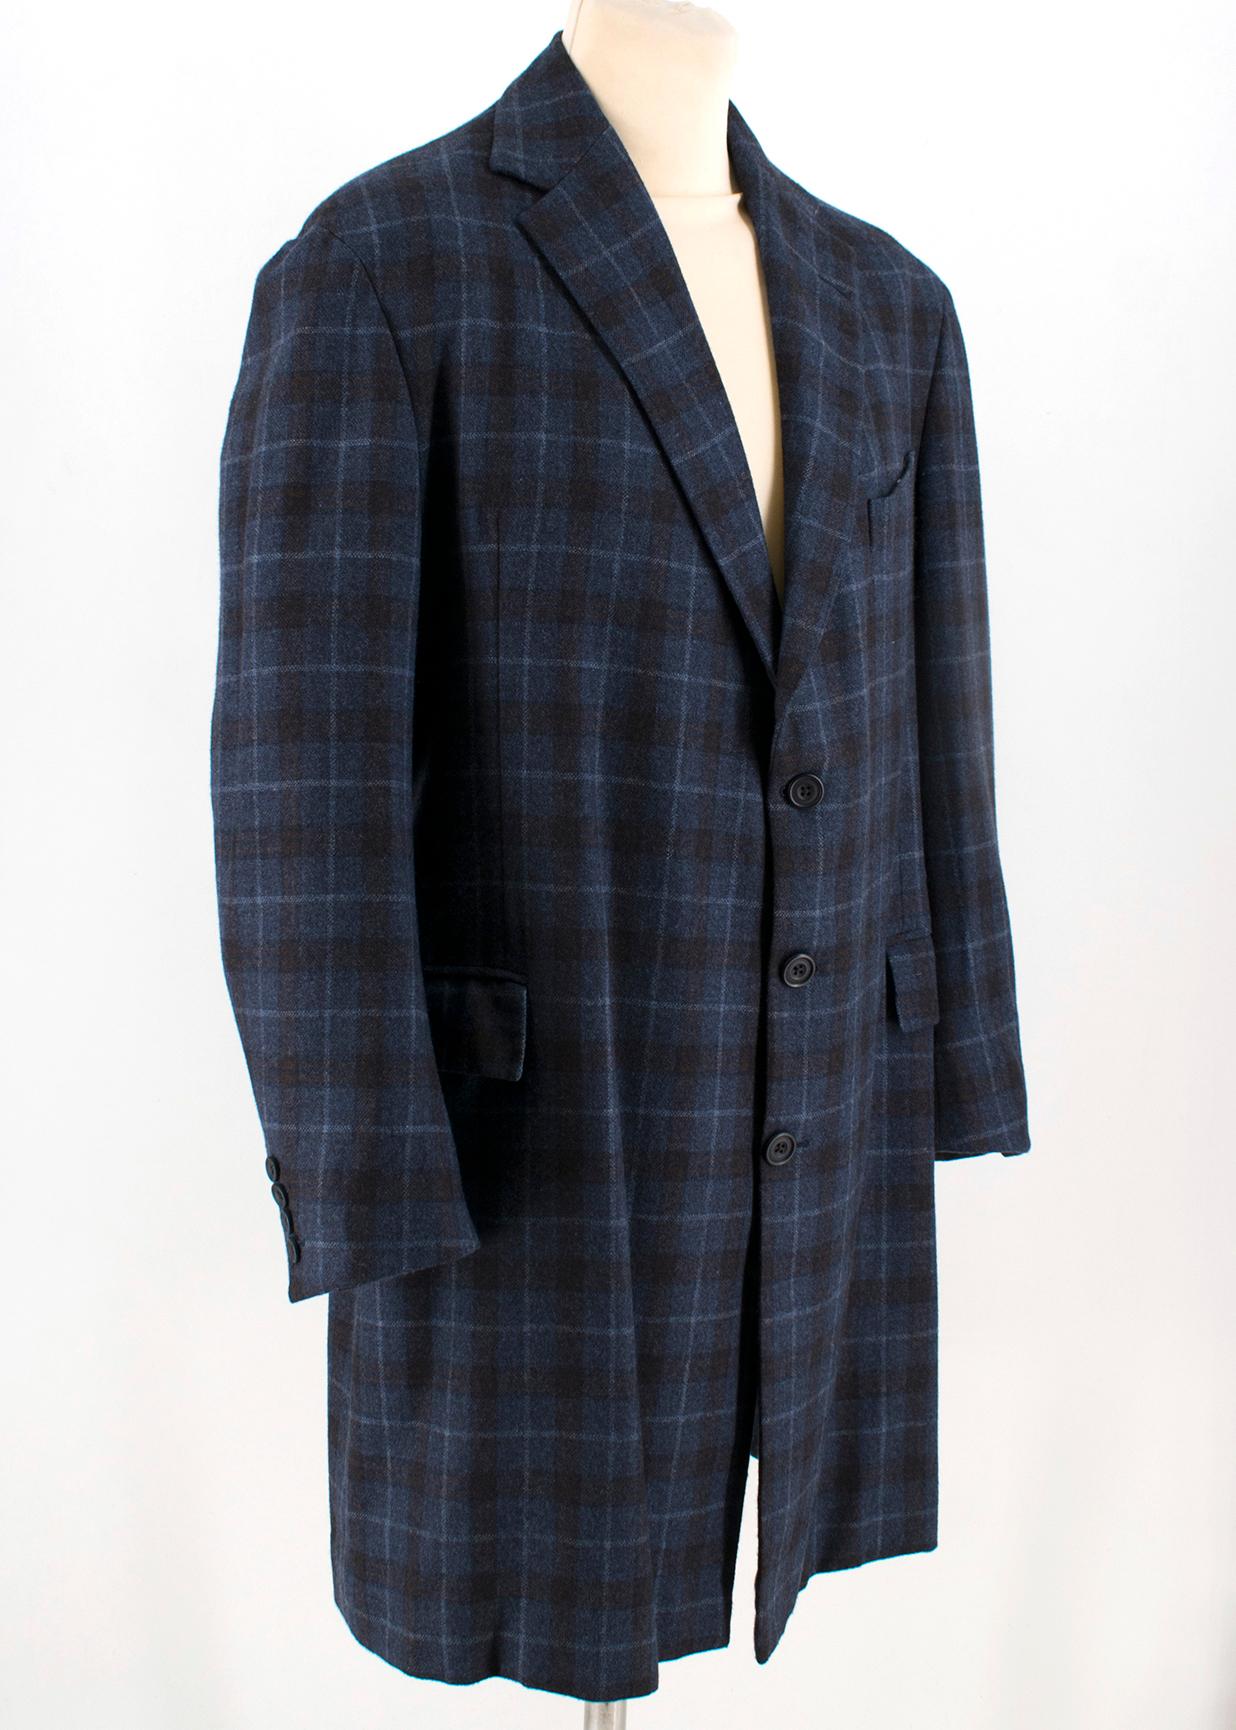 Hardy Amies Navy Blue Check Wool Men's Longline Coat	

- Woven Wool
- Single Breasted
- Navy Blue, with white, red and oxford blue check
- Notch Lapel
- Black button cuffs 
- Dart Stitch
- Interior and exterior pockets 

Please note, these items are